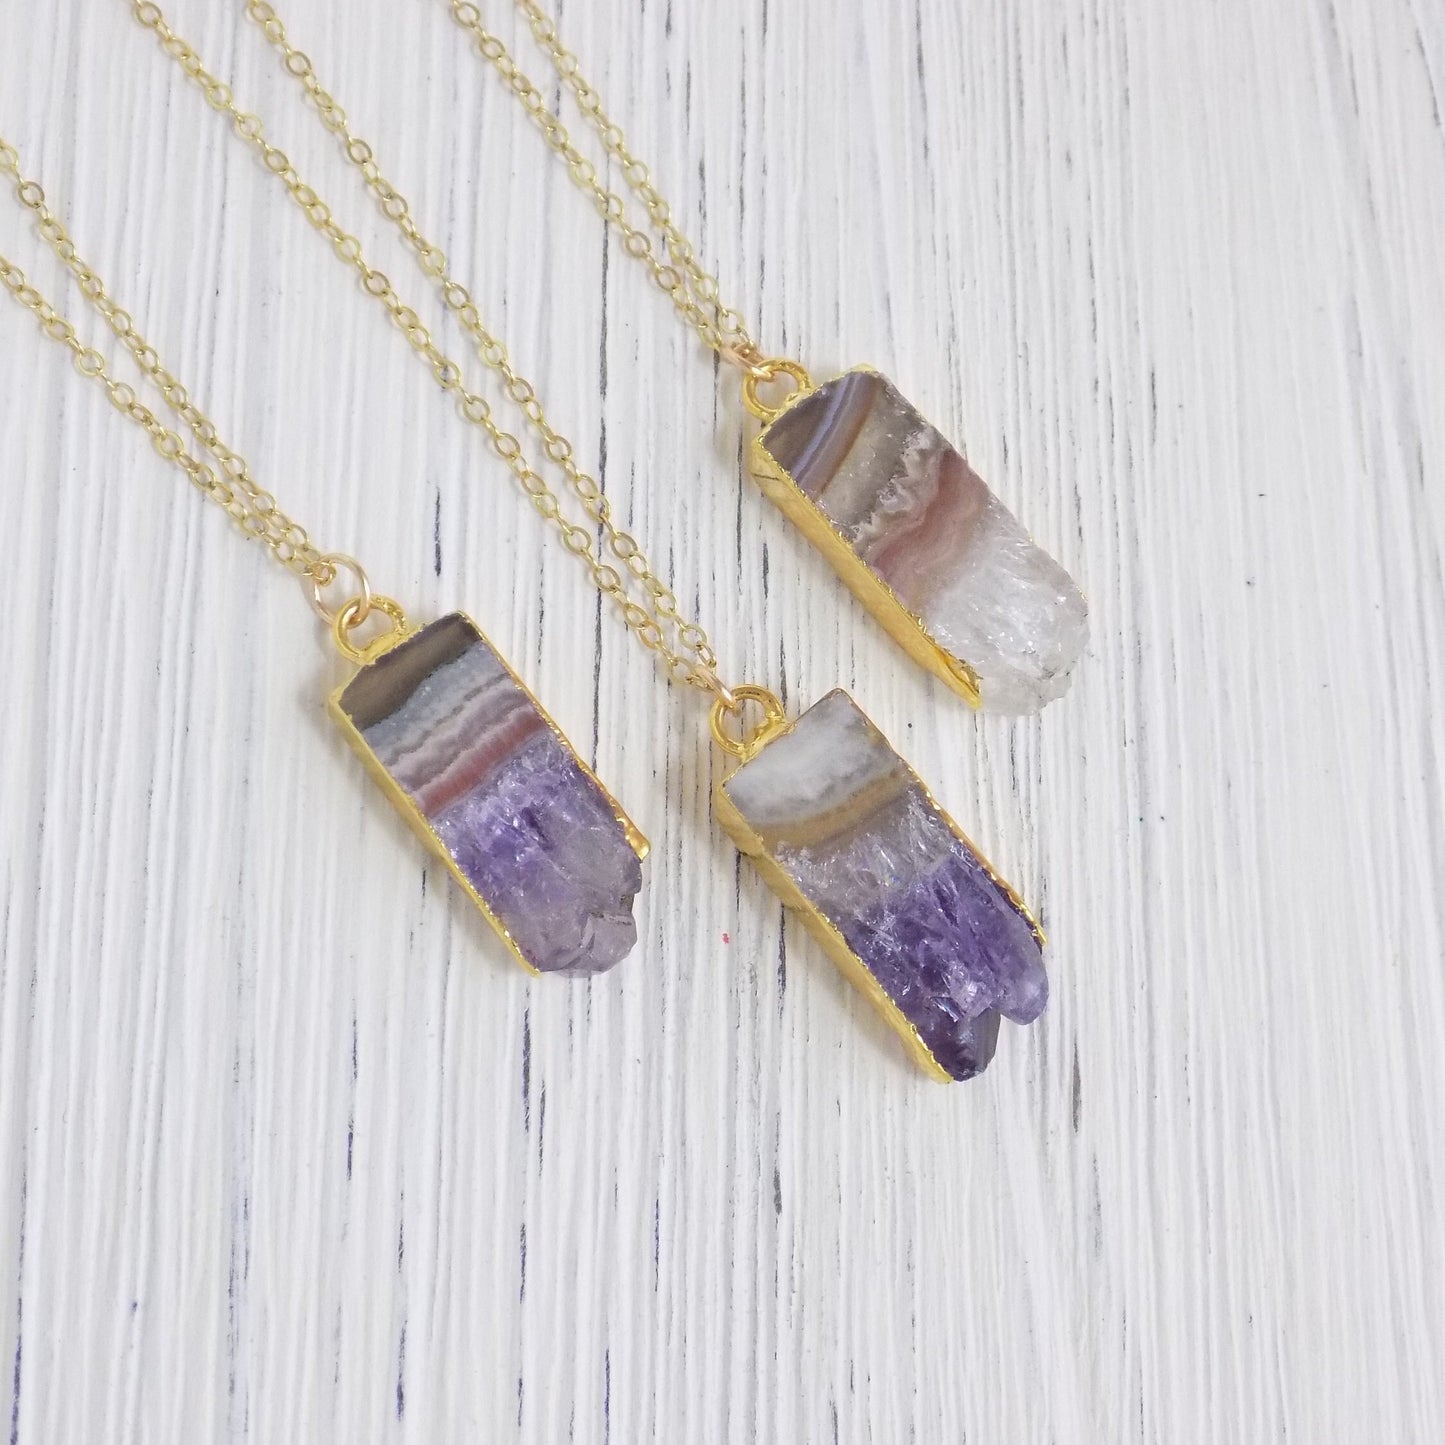 Personalized Necklace, Crystal Necklace, Amethyst Slice, Initial Necklace, Gold Amethyst, Druzy Necklace, Purple Crystal, Long Layer R14-12